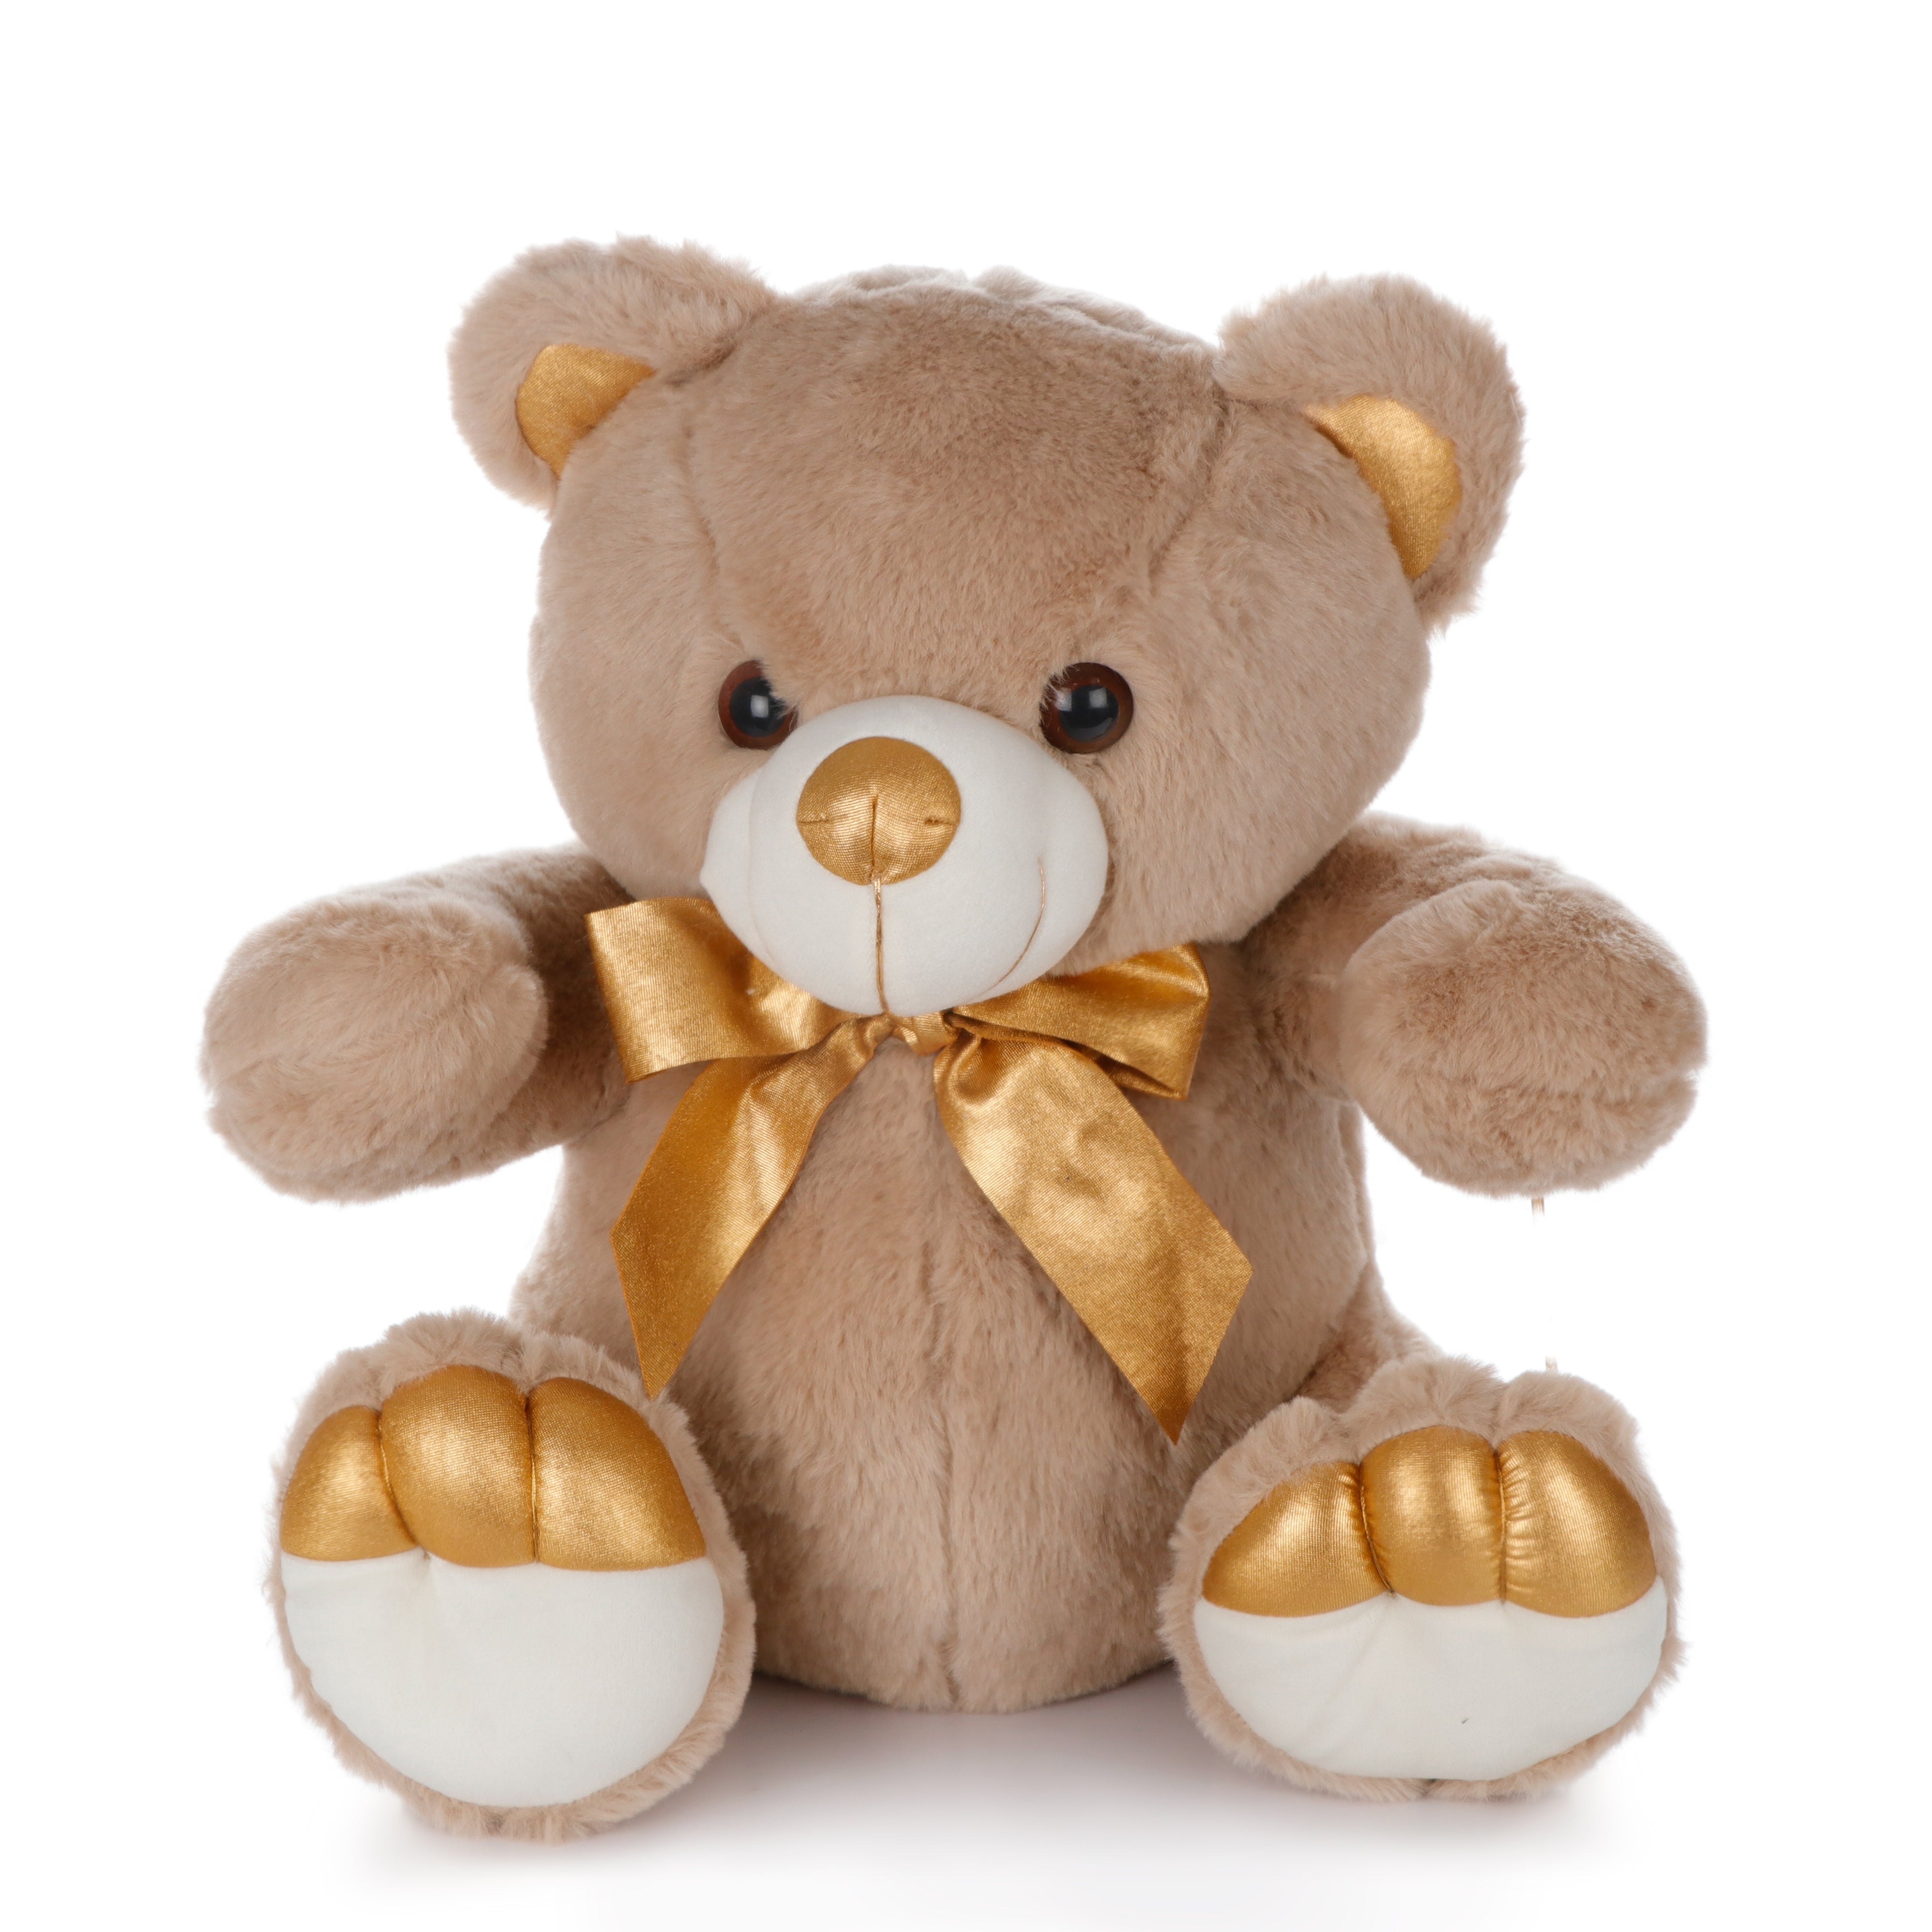 Archies | Archies Soft Toys, Teddy Bear For Girls, Soft Toys Boyfriend, Husband For Kids, Birthday Gift For Girls,Wife,   Brown Teddy Bear with Golden Paws - 40CM 0